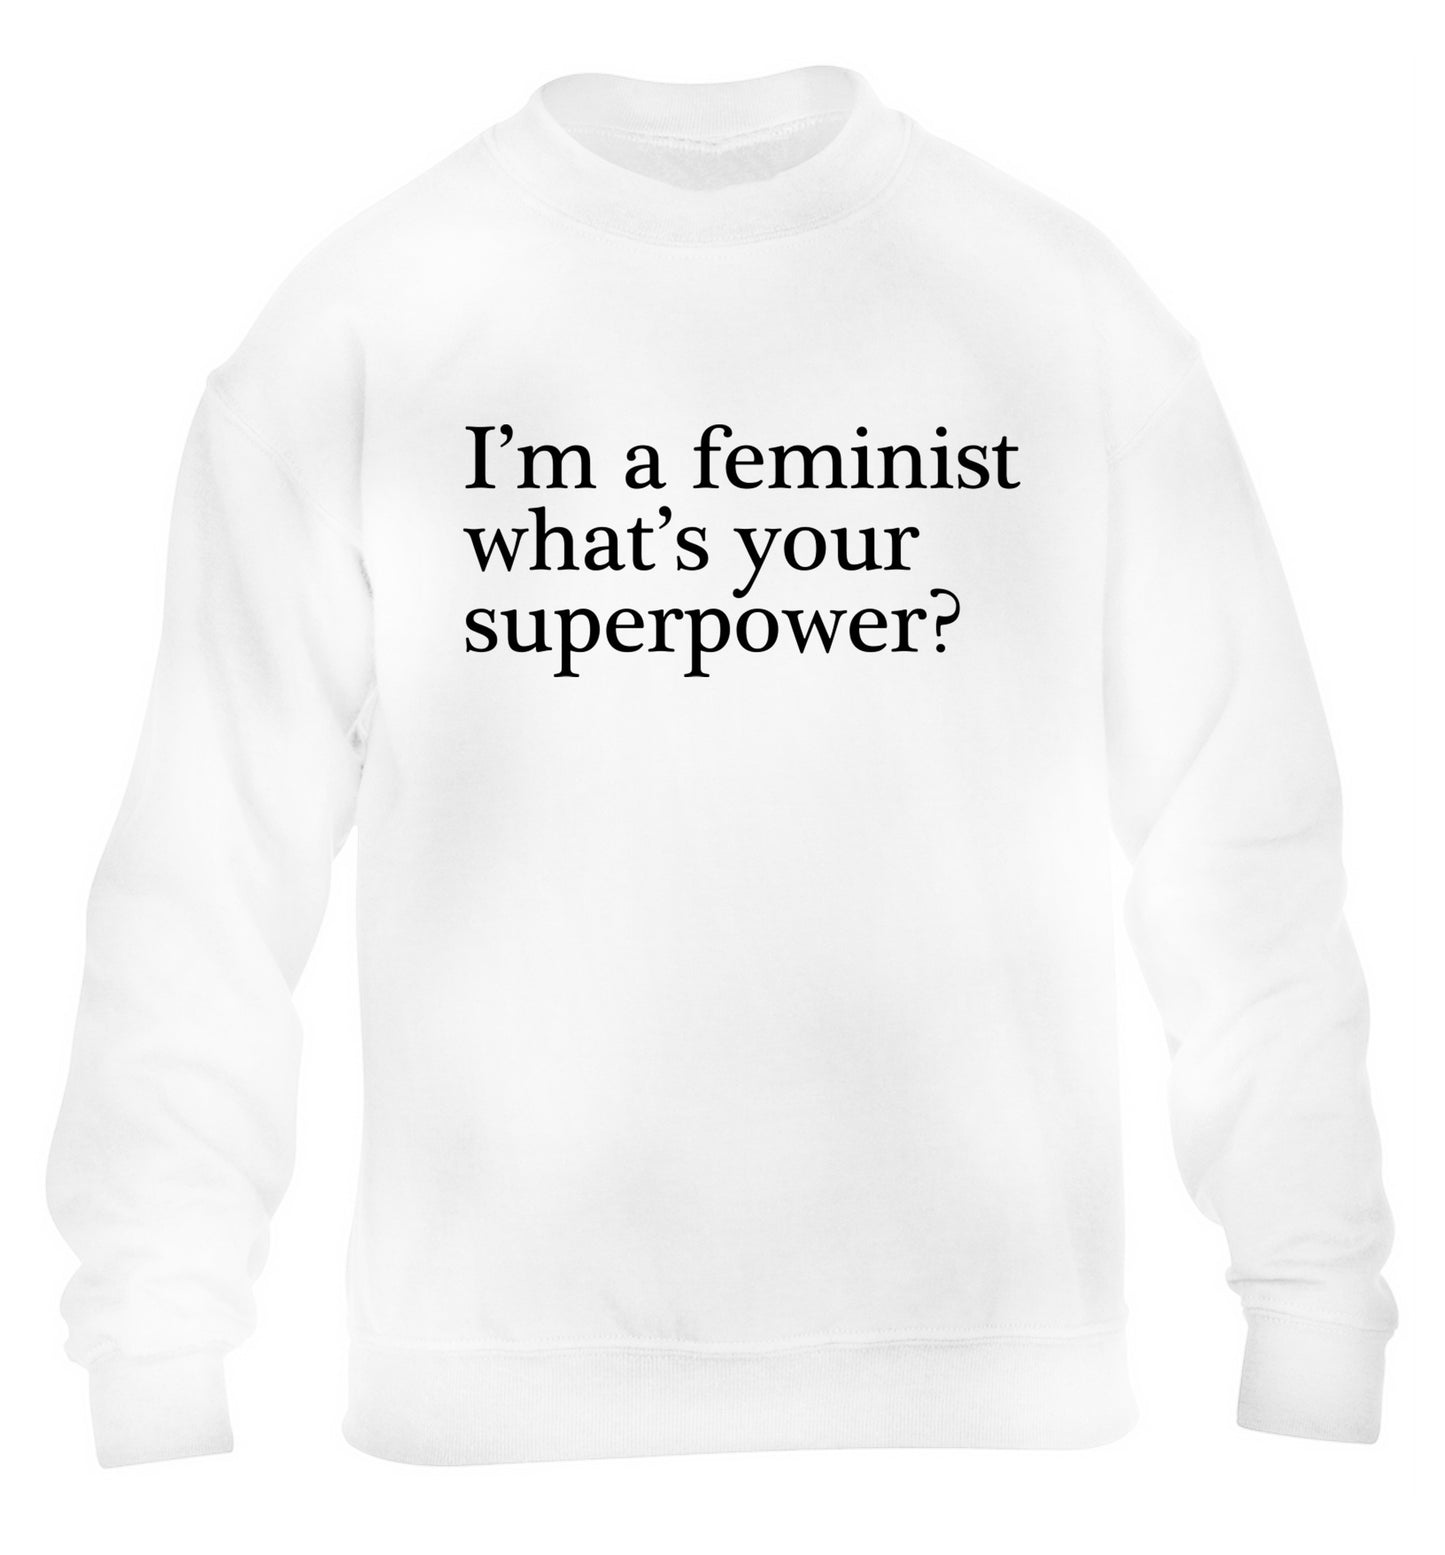 I'm a feminist what's your superpower? children's white sweater 12-14 Years